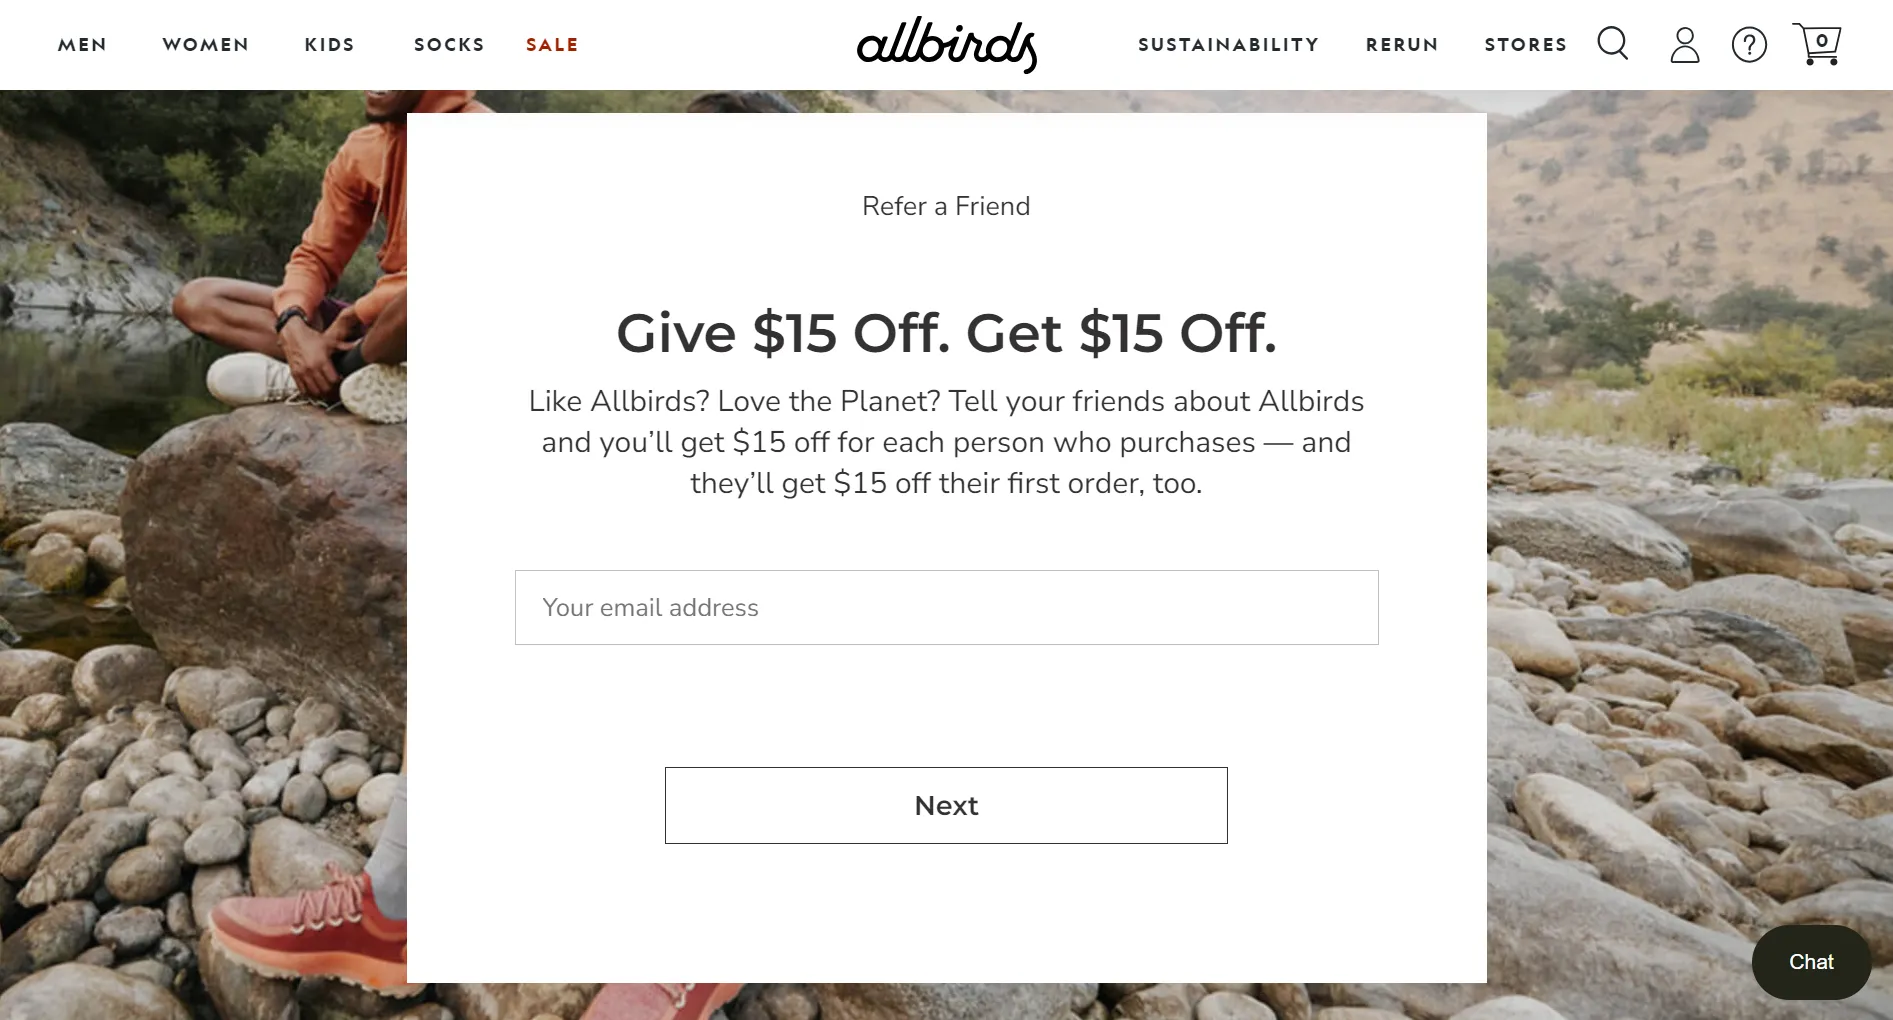 The Allbirds referral landing page features a background image of two people on a hike with stones in the background, symbolizing the brand's commitment to eco-friendliness. In the foreground, there is a white box with small and large font text that promotes their referral program, offering $15 off to both the referrer and the recipient. The page also includes a section to enter an email address and a call-to-action white button labeled "Next.”